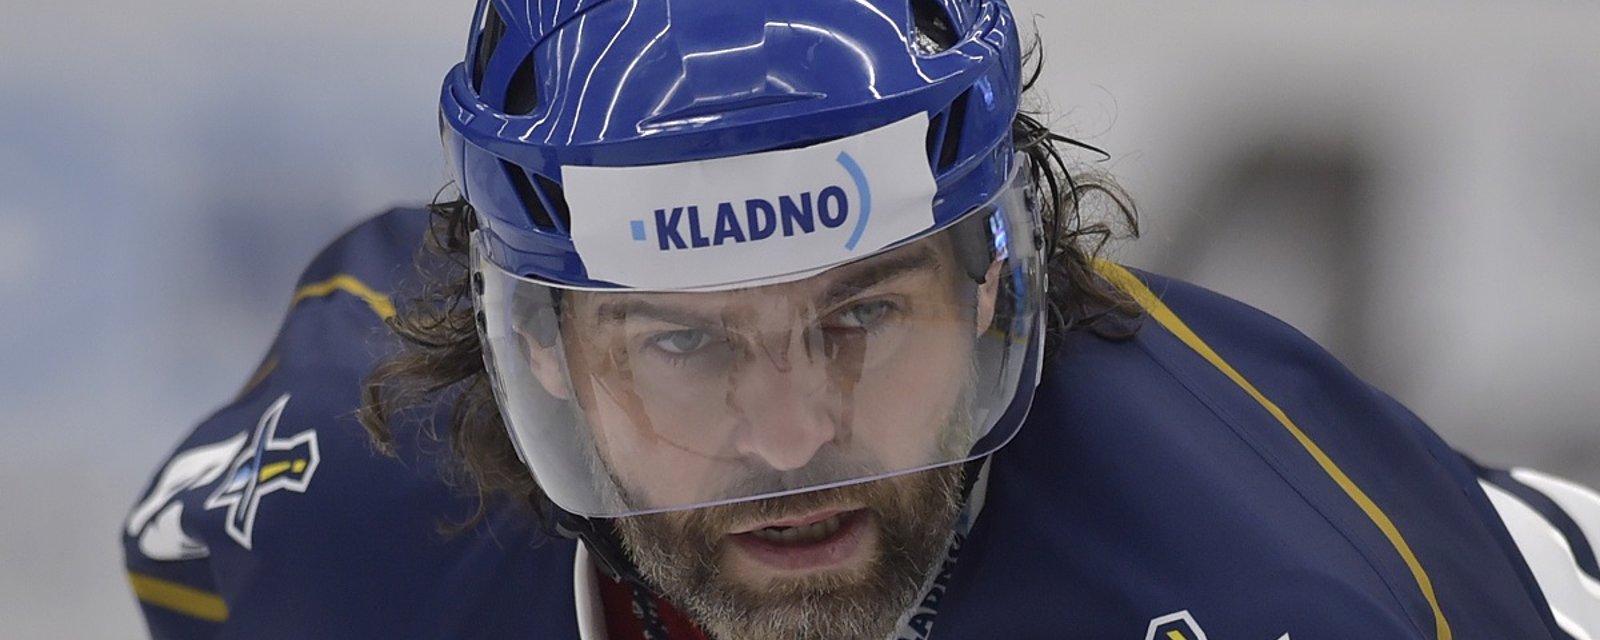 Jaromir Jagr continues to steal the show at 49 years old.